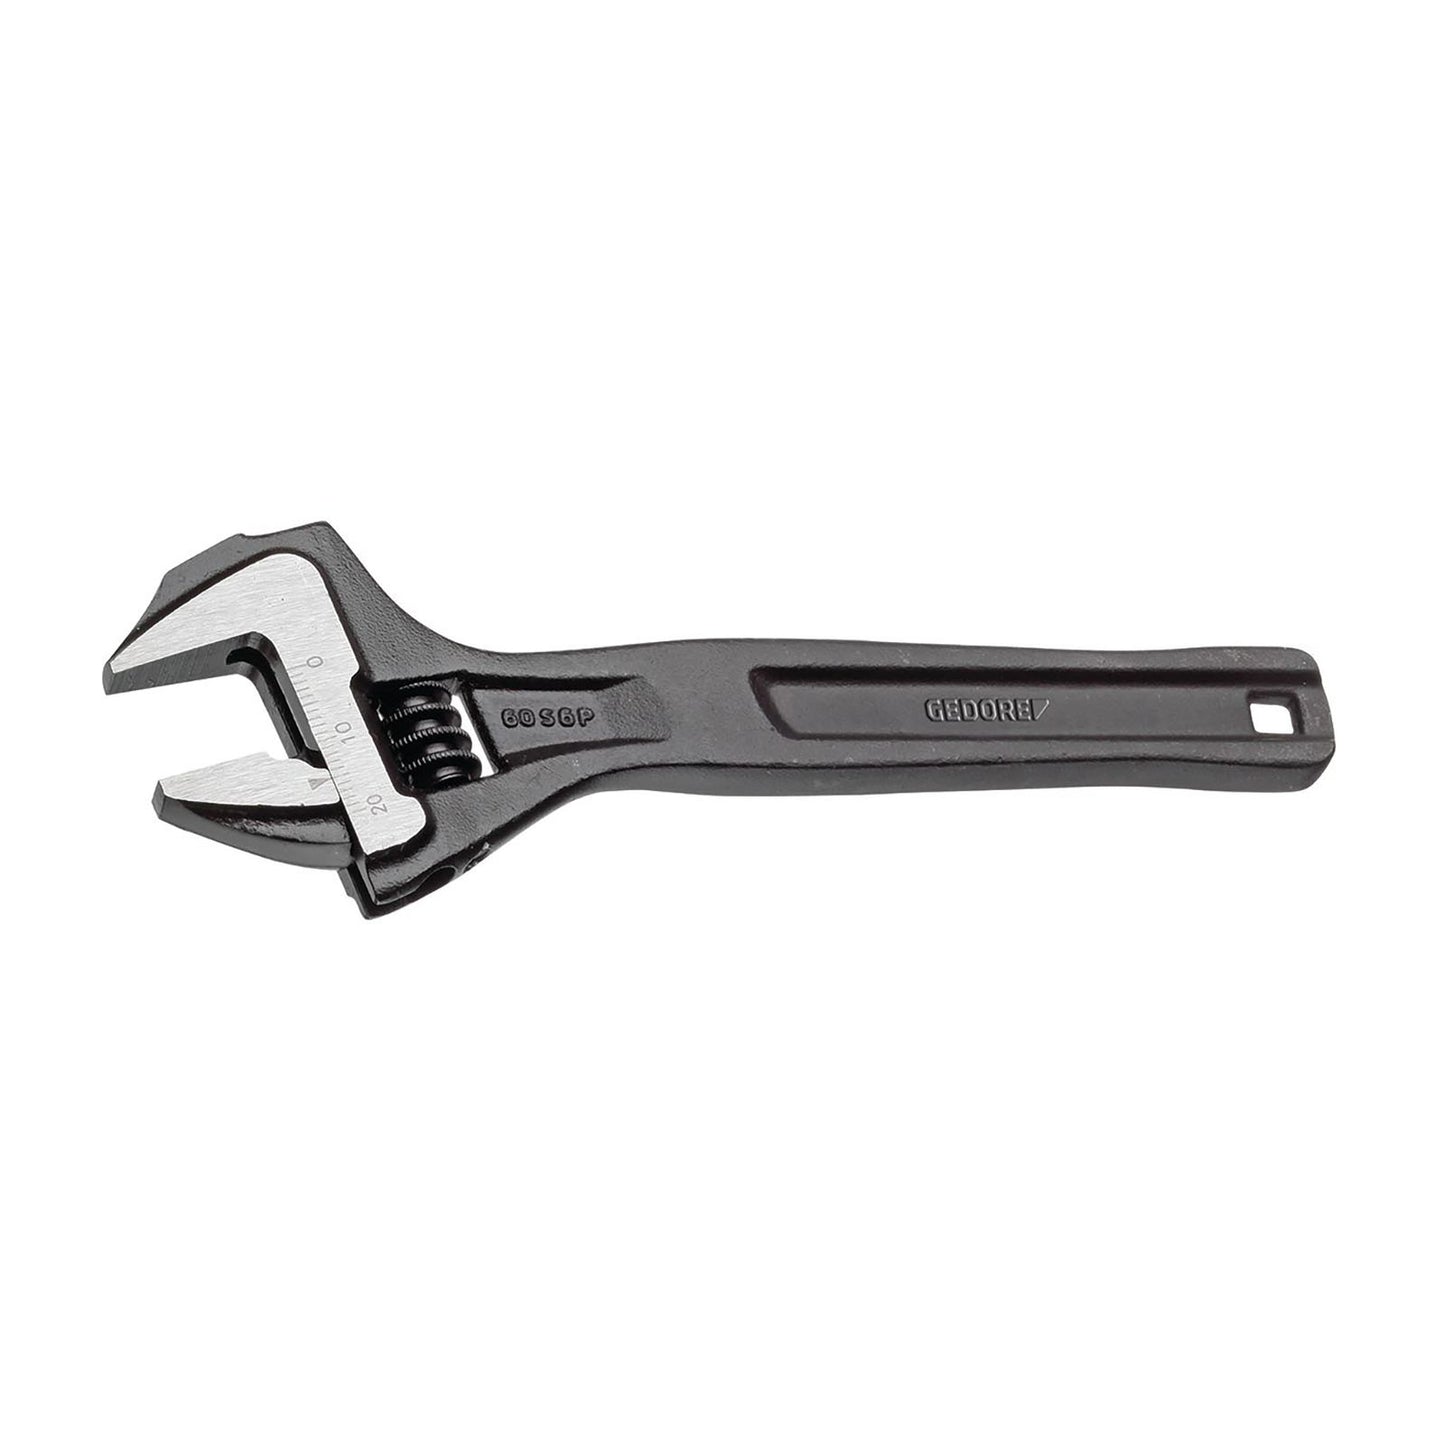 GEDORE 60 S-8 P - Phosphated Adjustable Wrench, 8" (1966294)